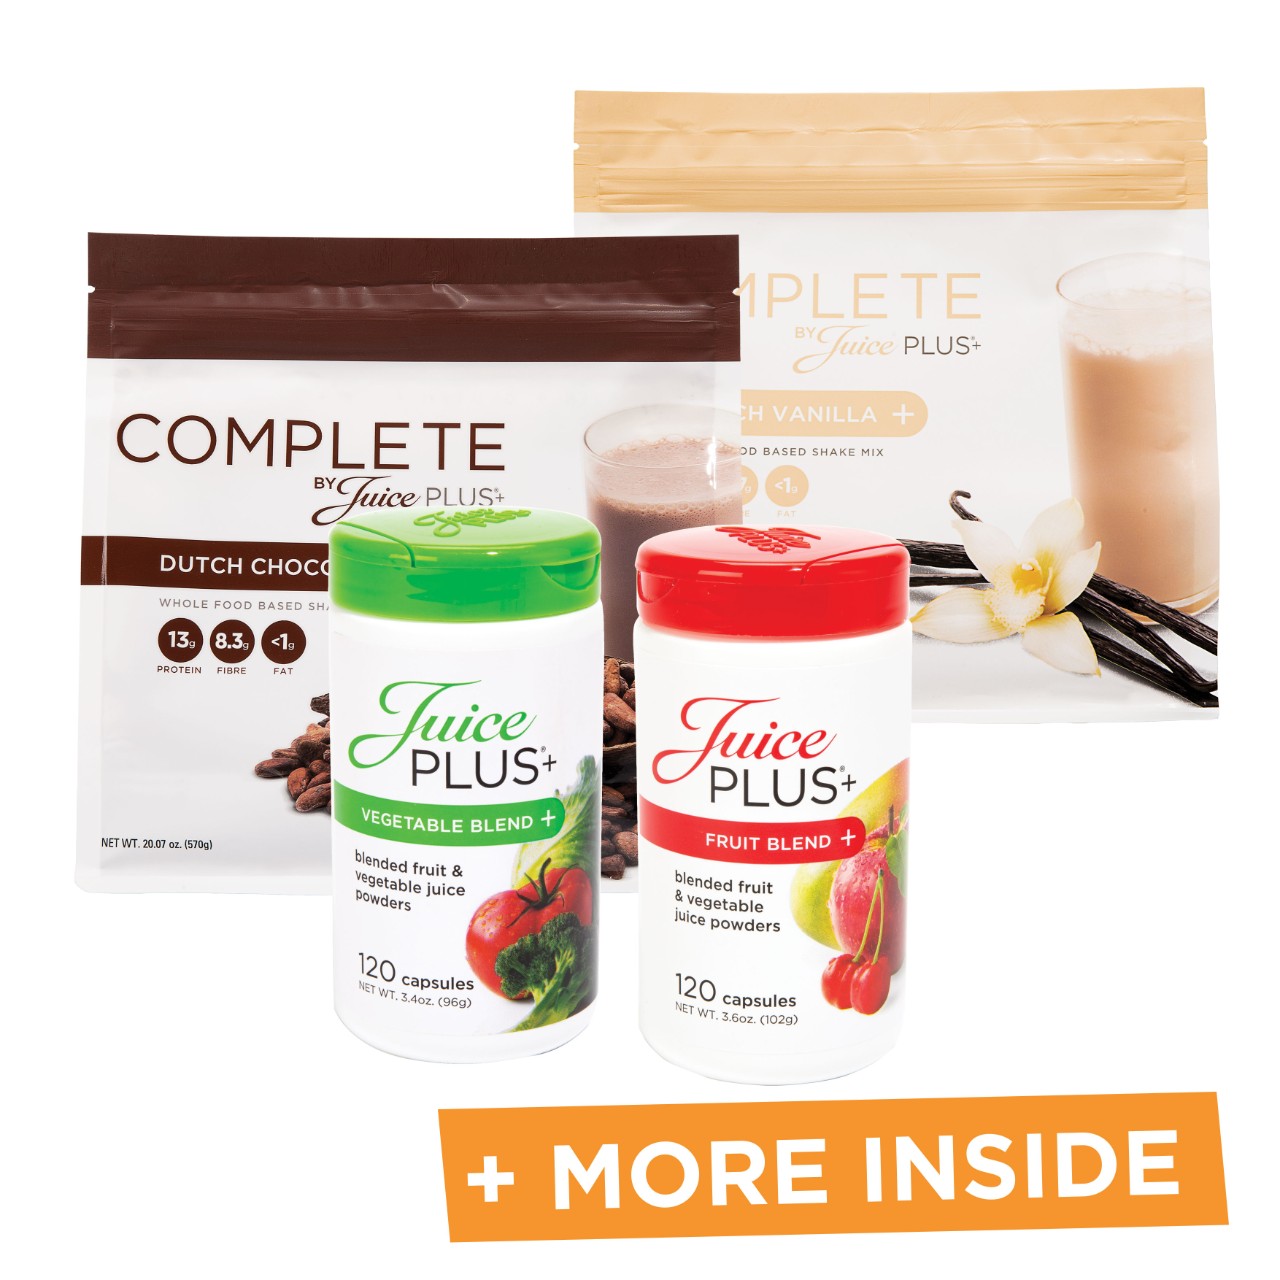 Juice Plus+ products for sale